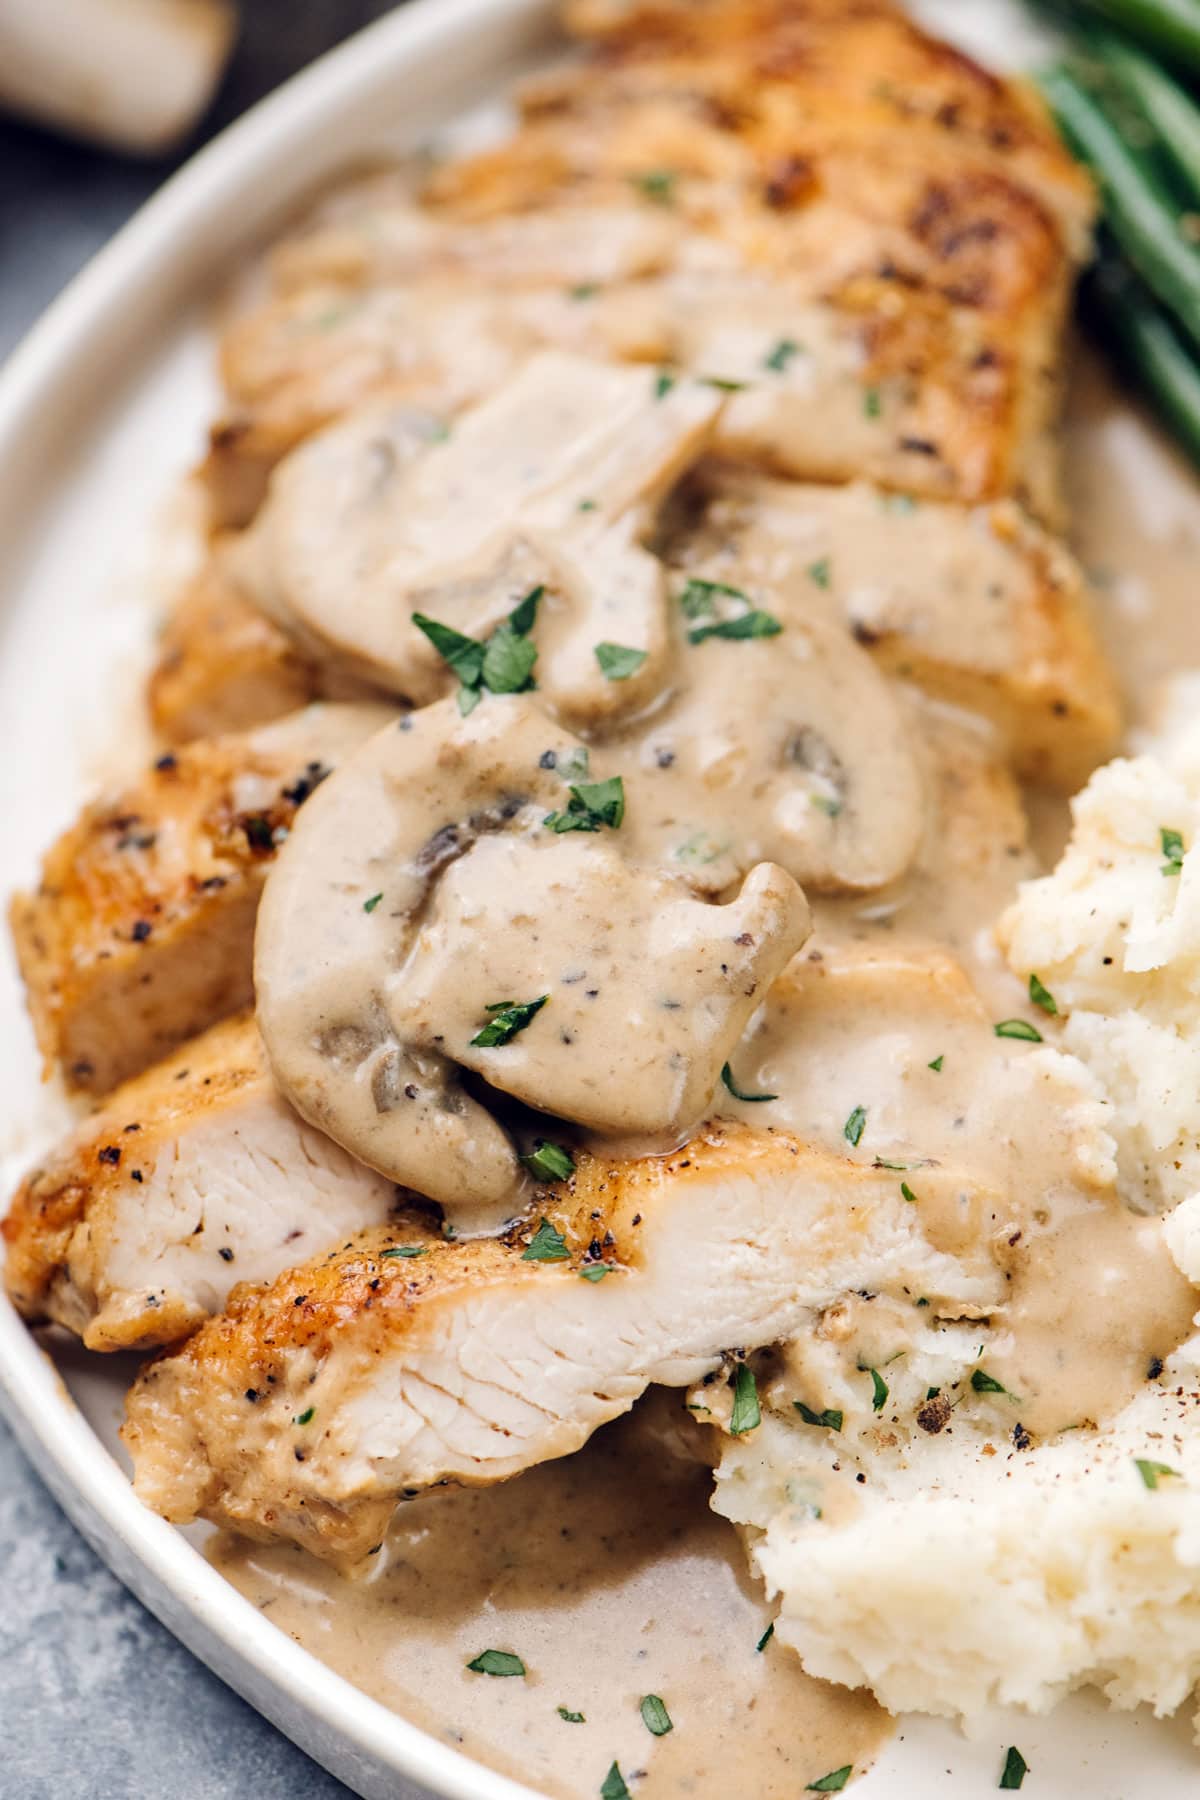 Sliced chicken with creamy mushroom sauce on a cream plate with mashed potatoes and green beans.